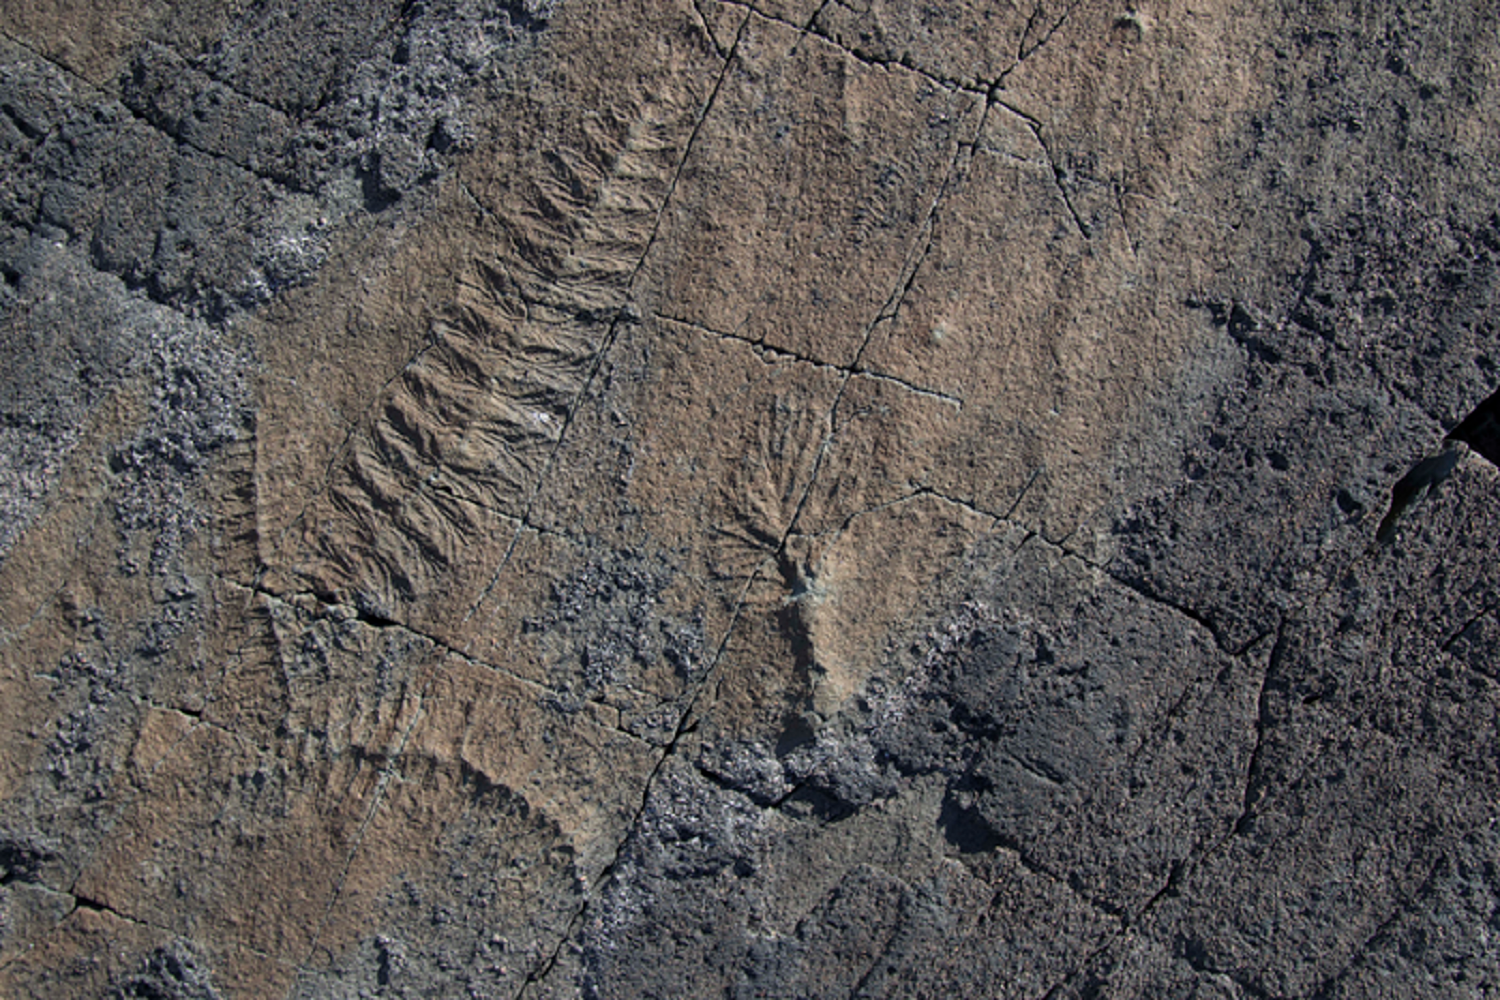 Spiny extinct animals fossilized in a seabed in Newfoundland, Canada